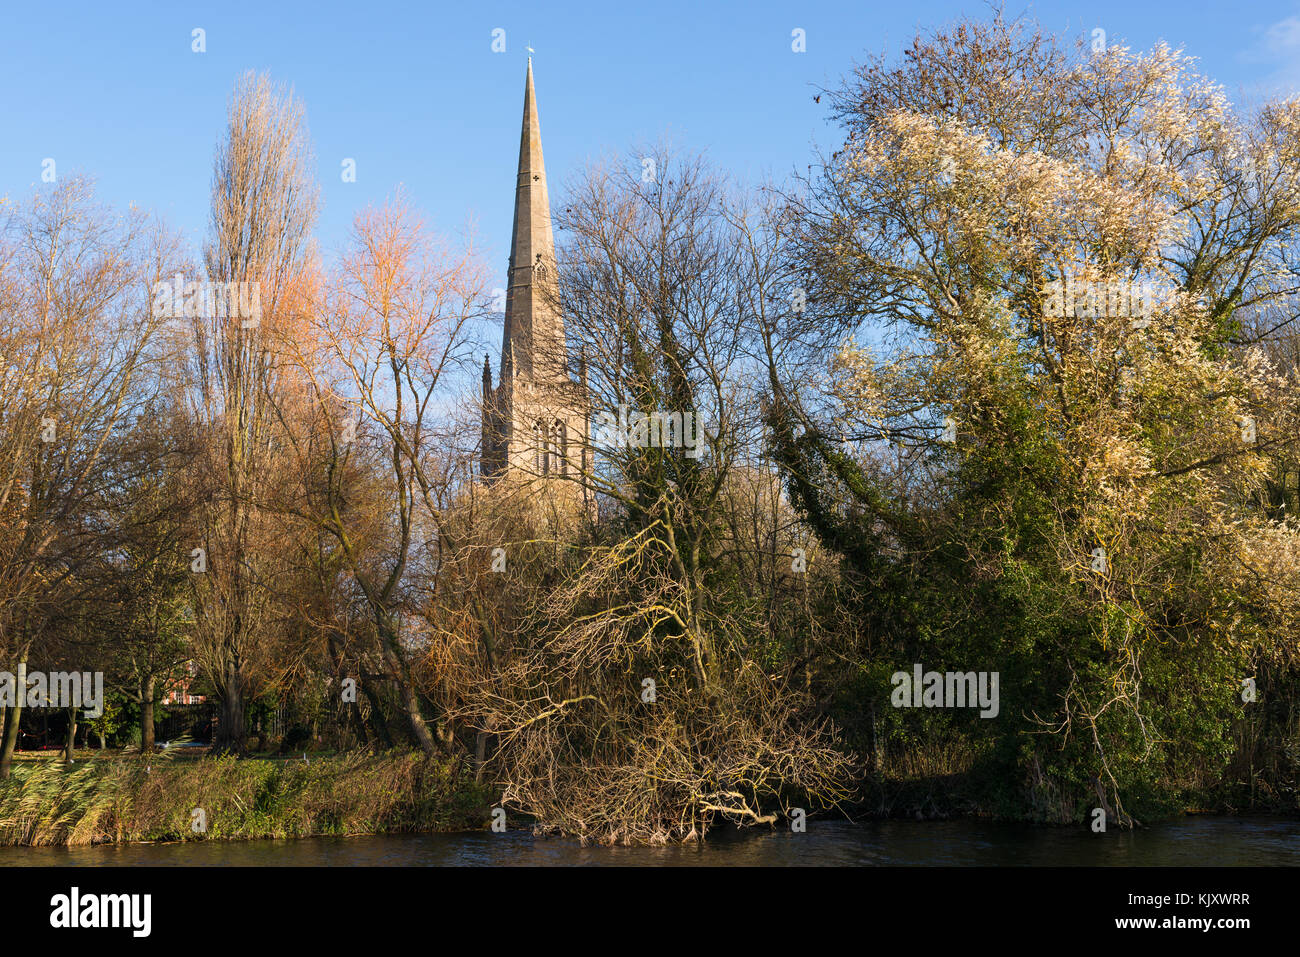 All Saints Church spire on the other side of Great Ouse river in St Ives, seen from Hemingford Grey Meadow, Cambridgeshire, England, UK. Stock Photo